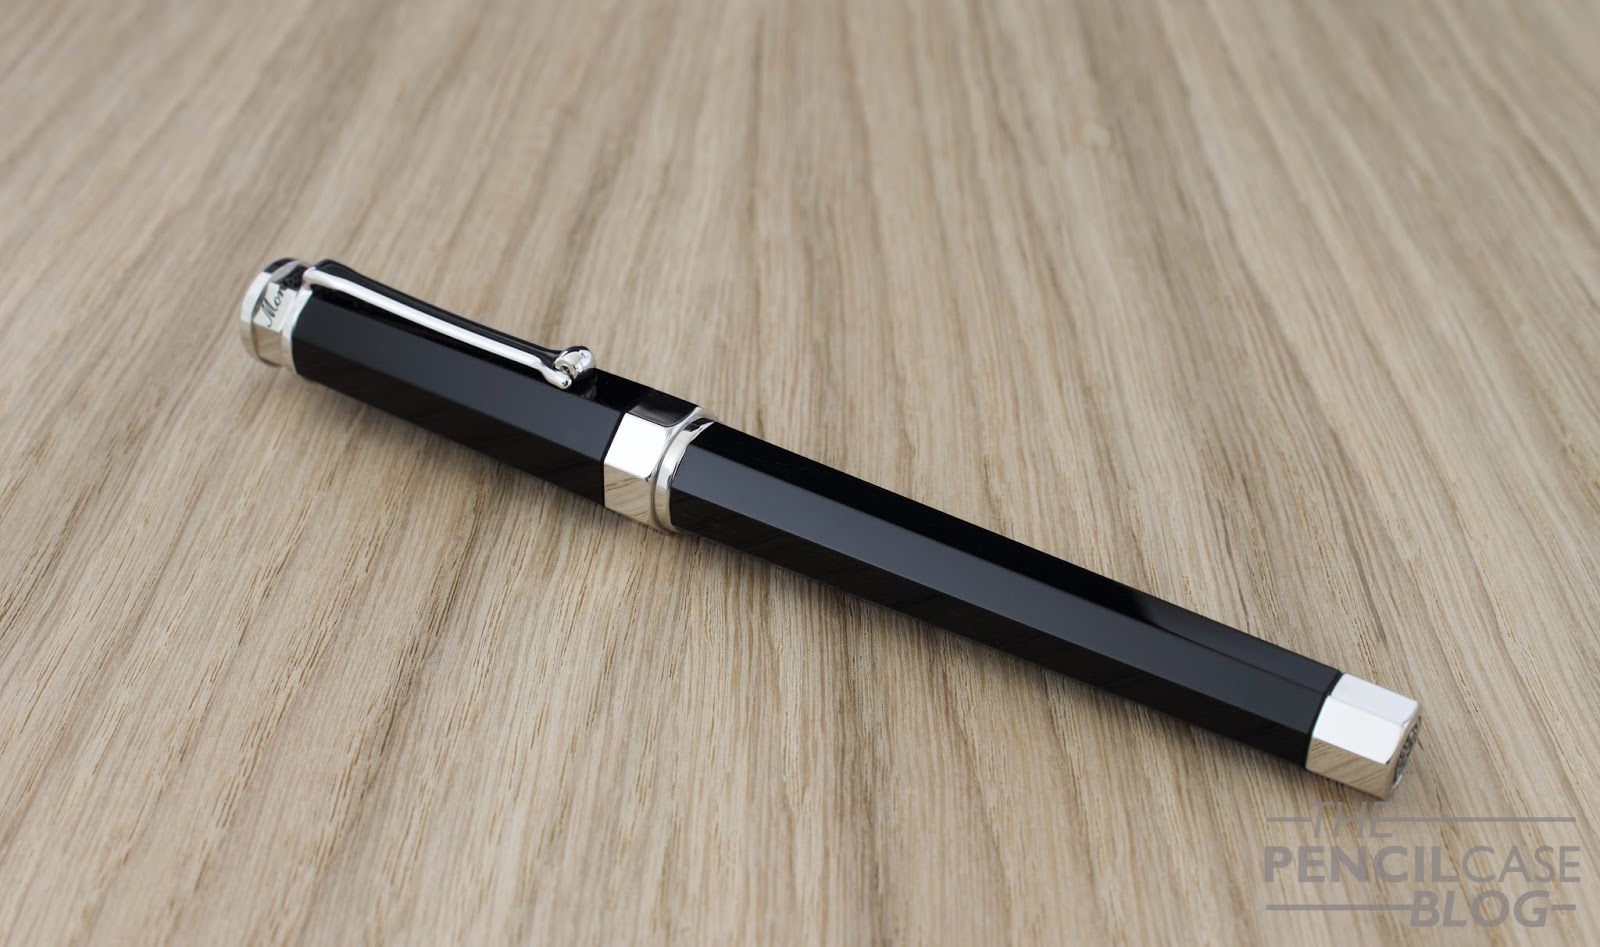 marge plannen shampoo MONTEGRAPPA NEROUNO FOUNTAIN PEN REVIEW | The Pencilcase Blog | Fountain pen,  Pencil, Ink and Paper reviews